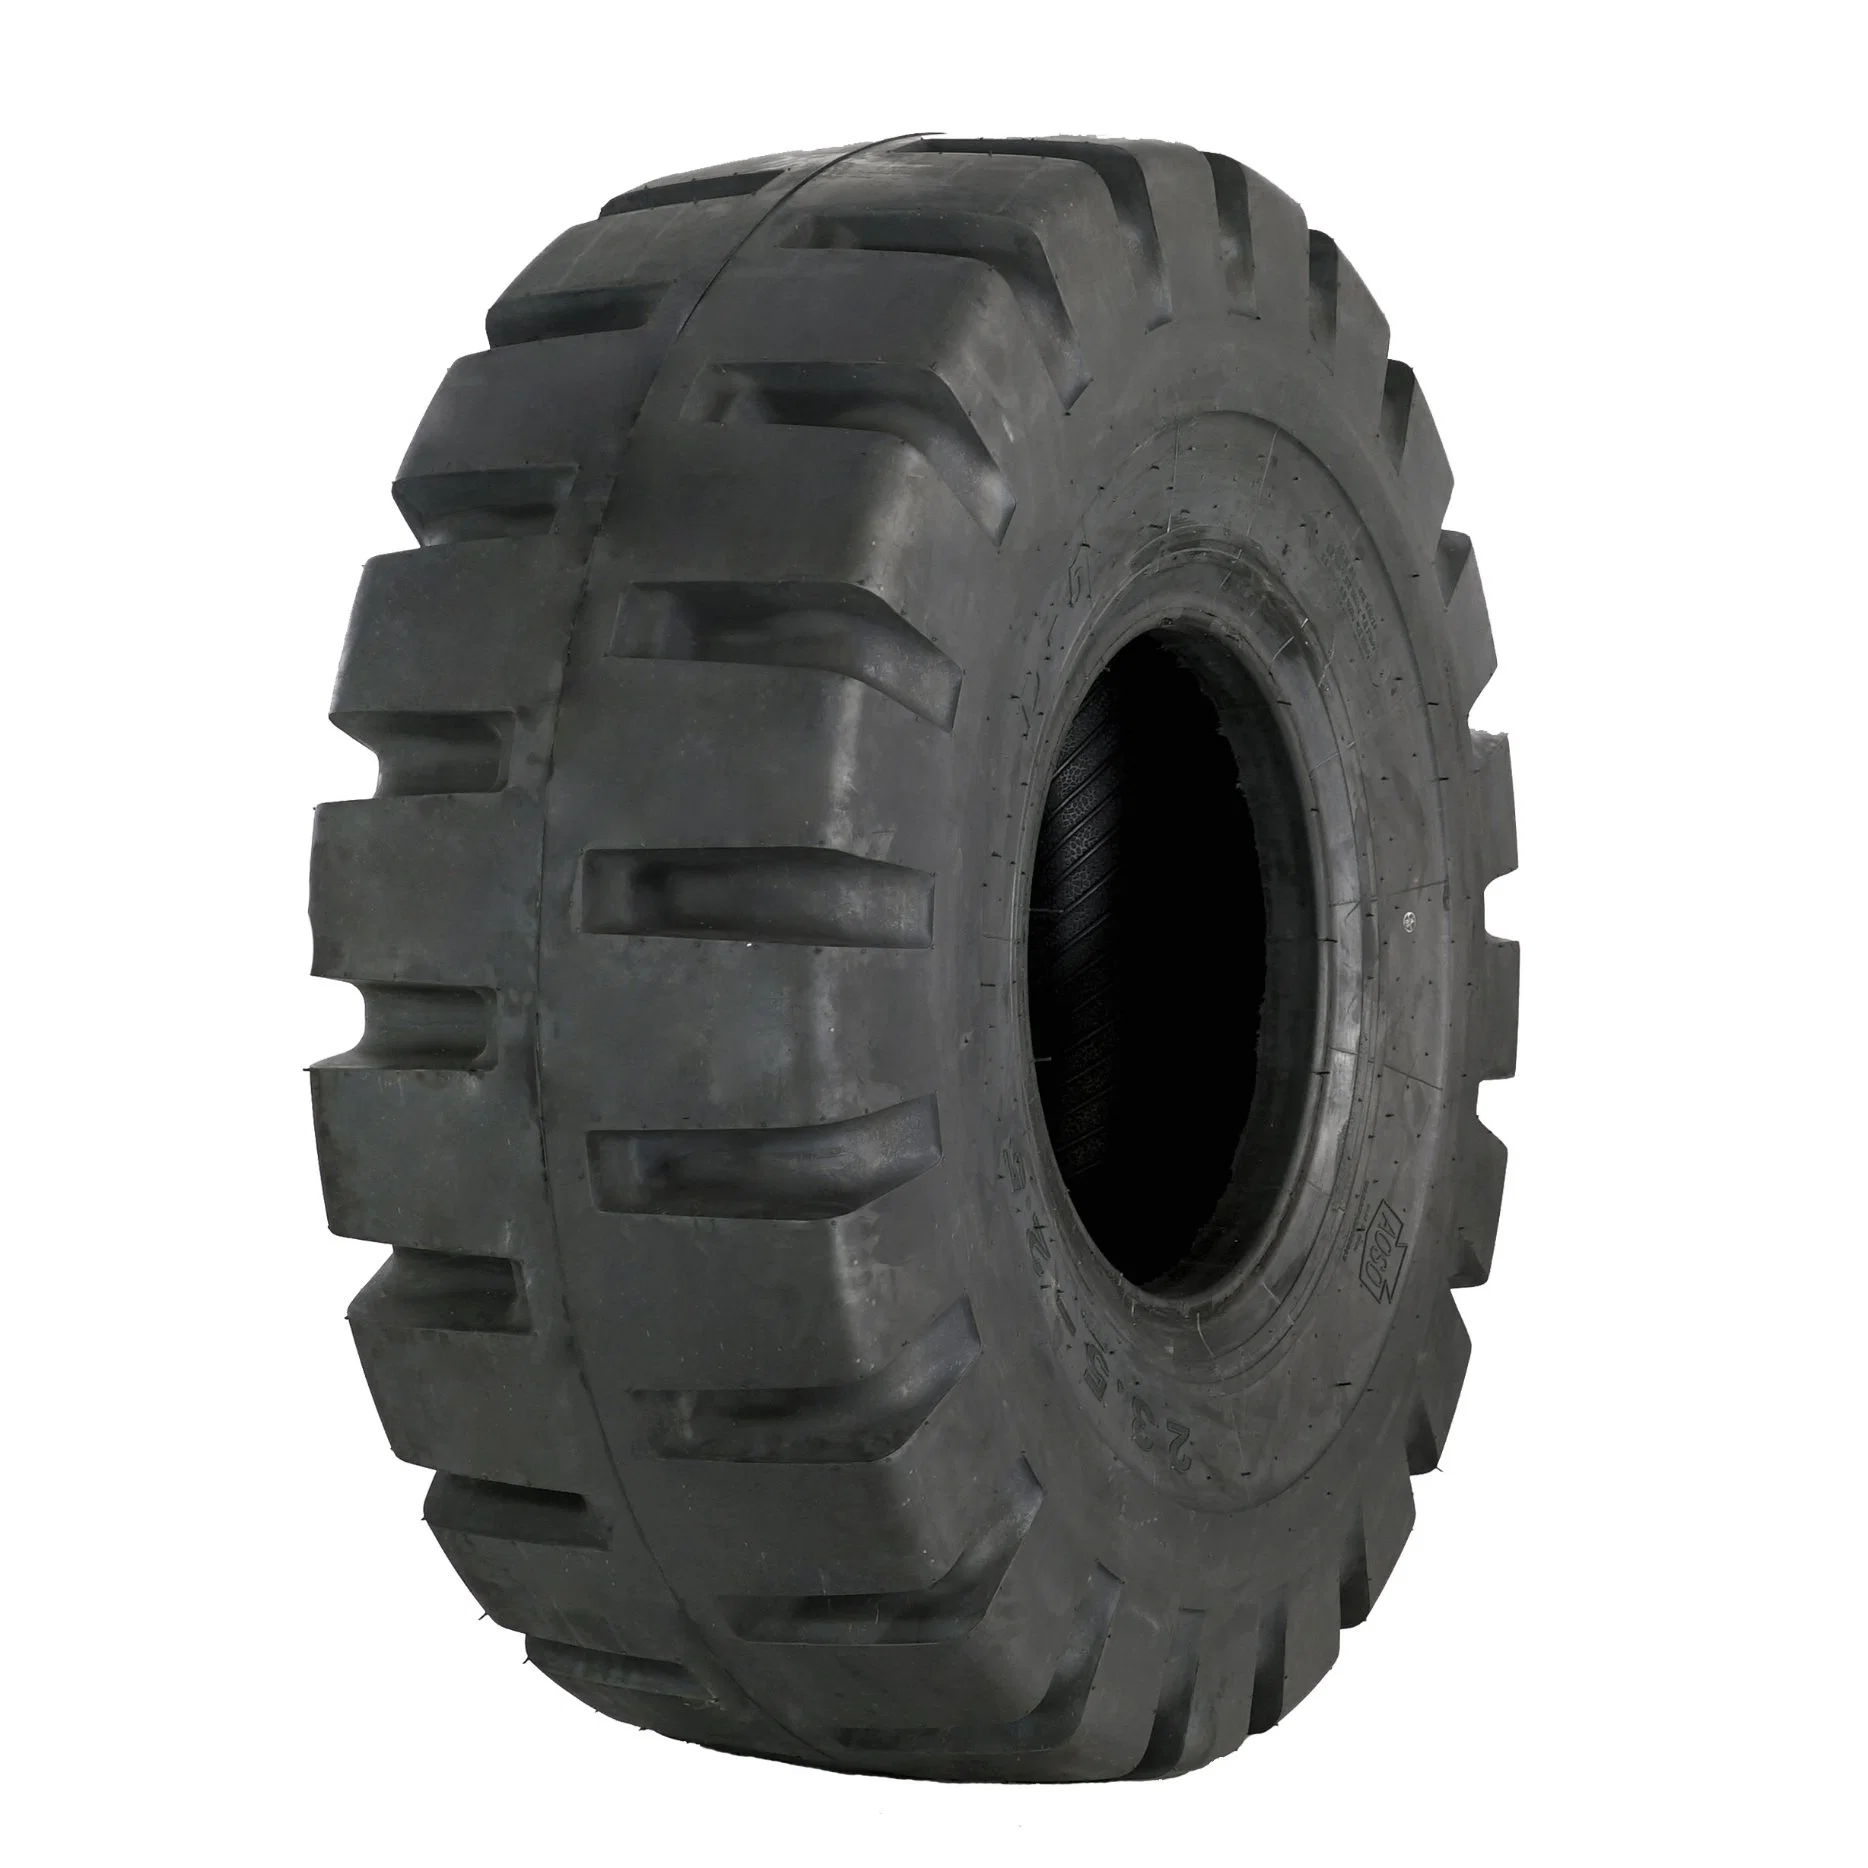 OTR Aulice Branded Tire for Loader and dozer heavy duty